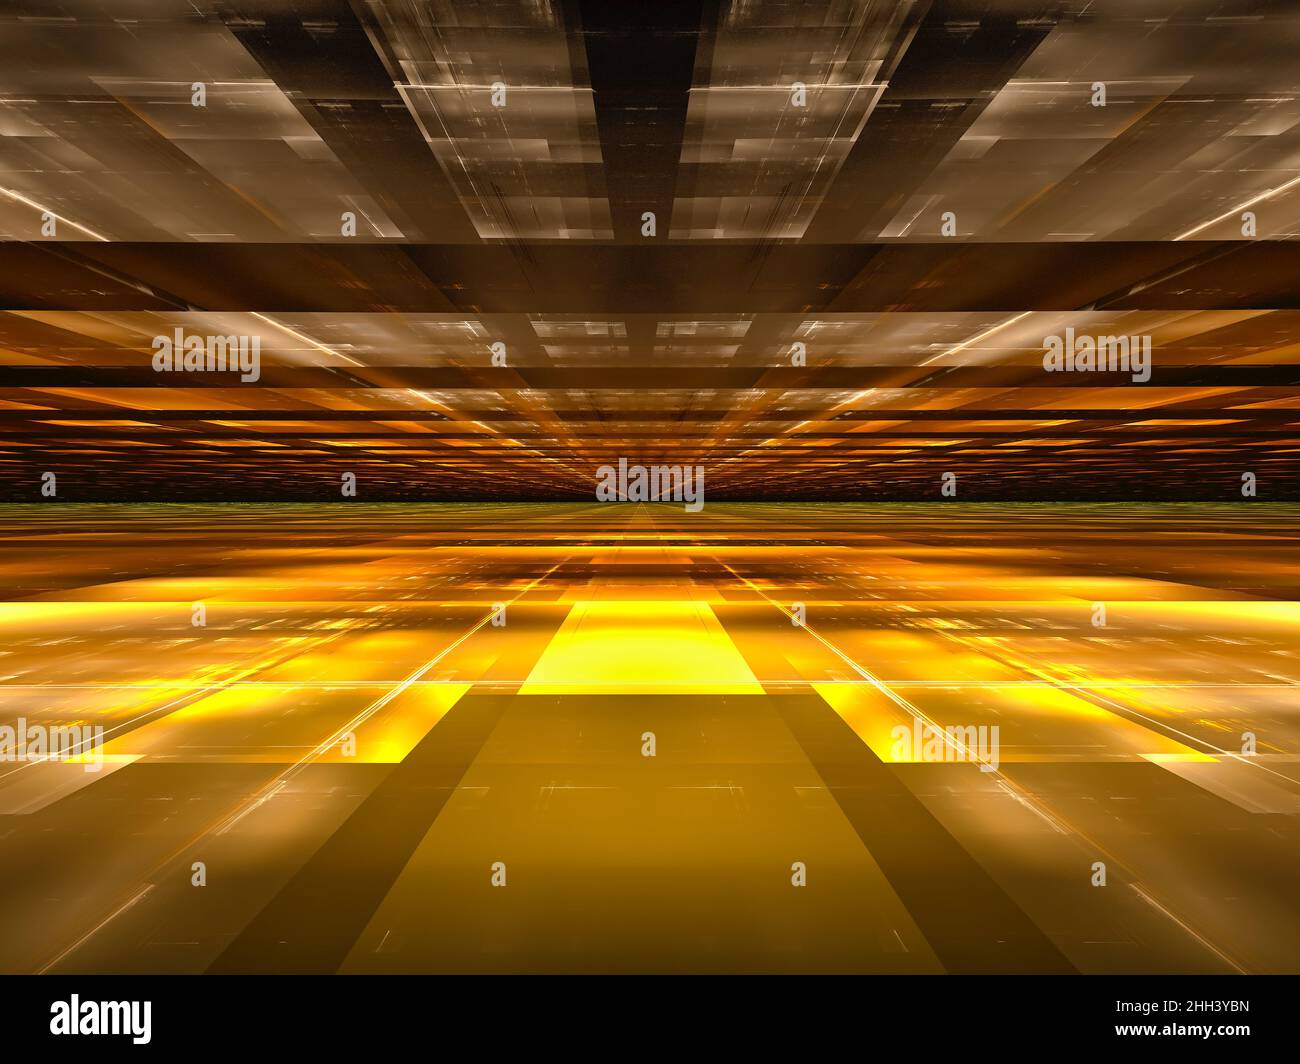 Simple golden background with perspective effect - abstract 3d illustration Stock Photo